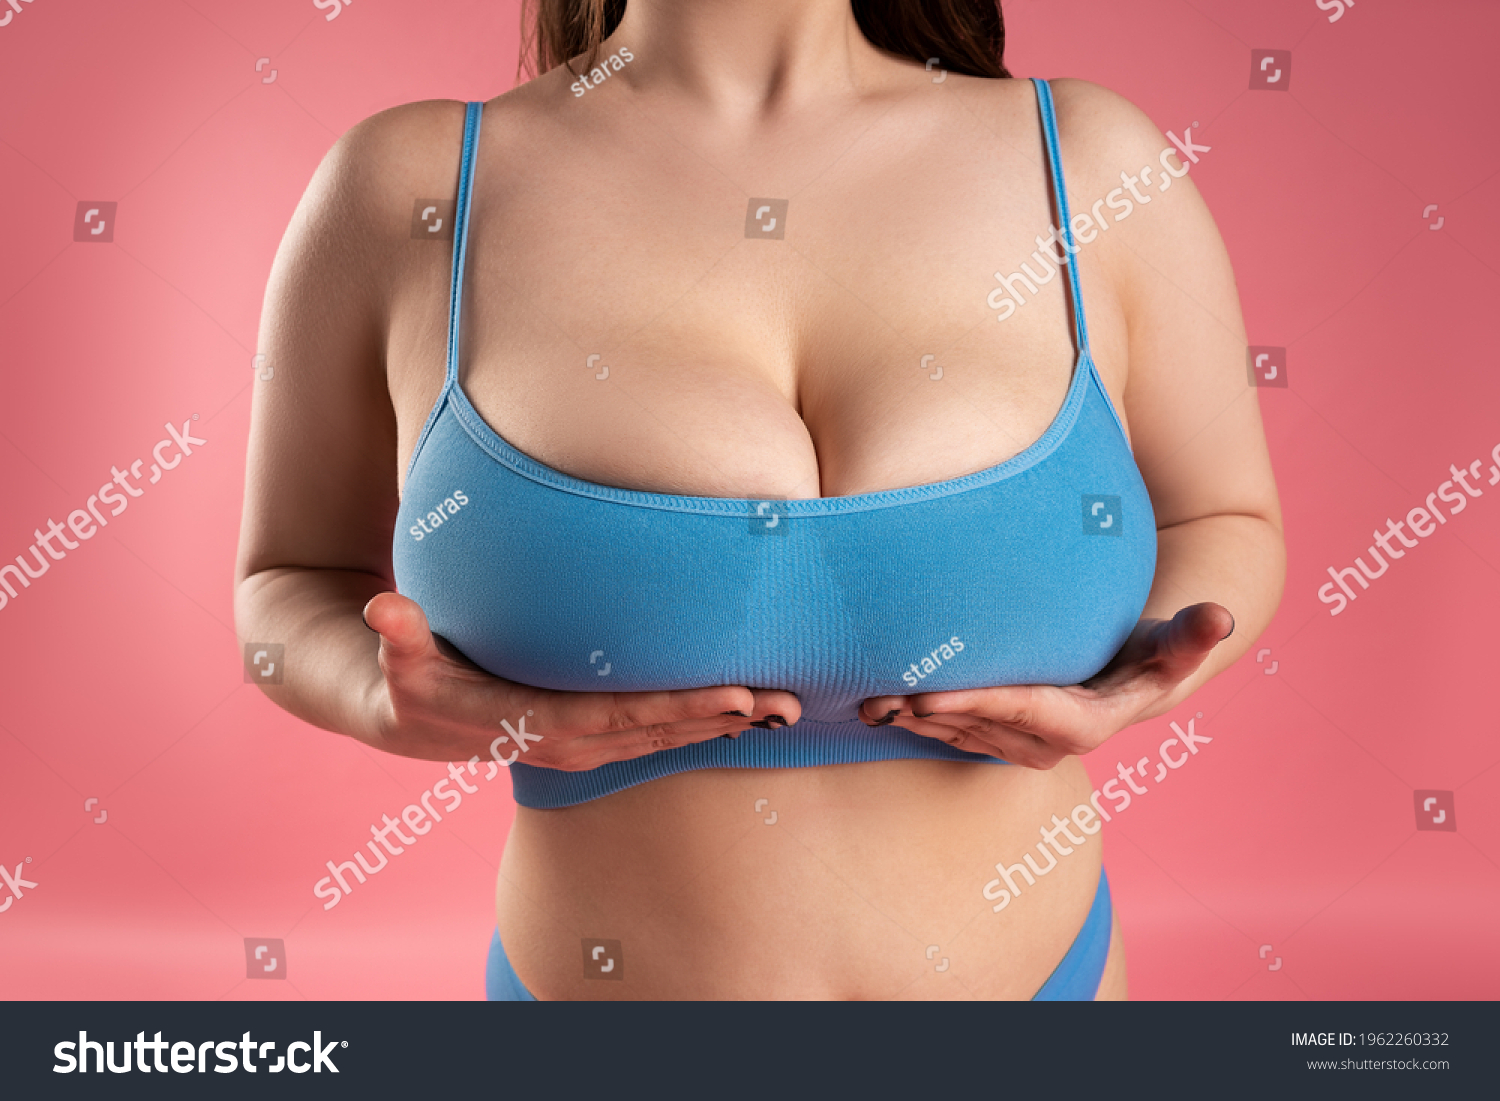 abdel rahman elsayed recommends pictures of very large breasts pic